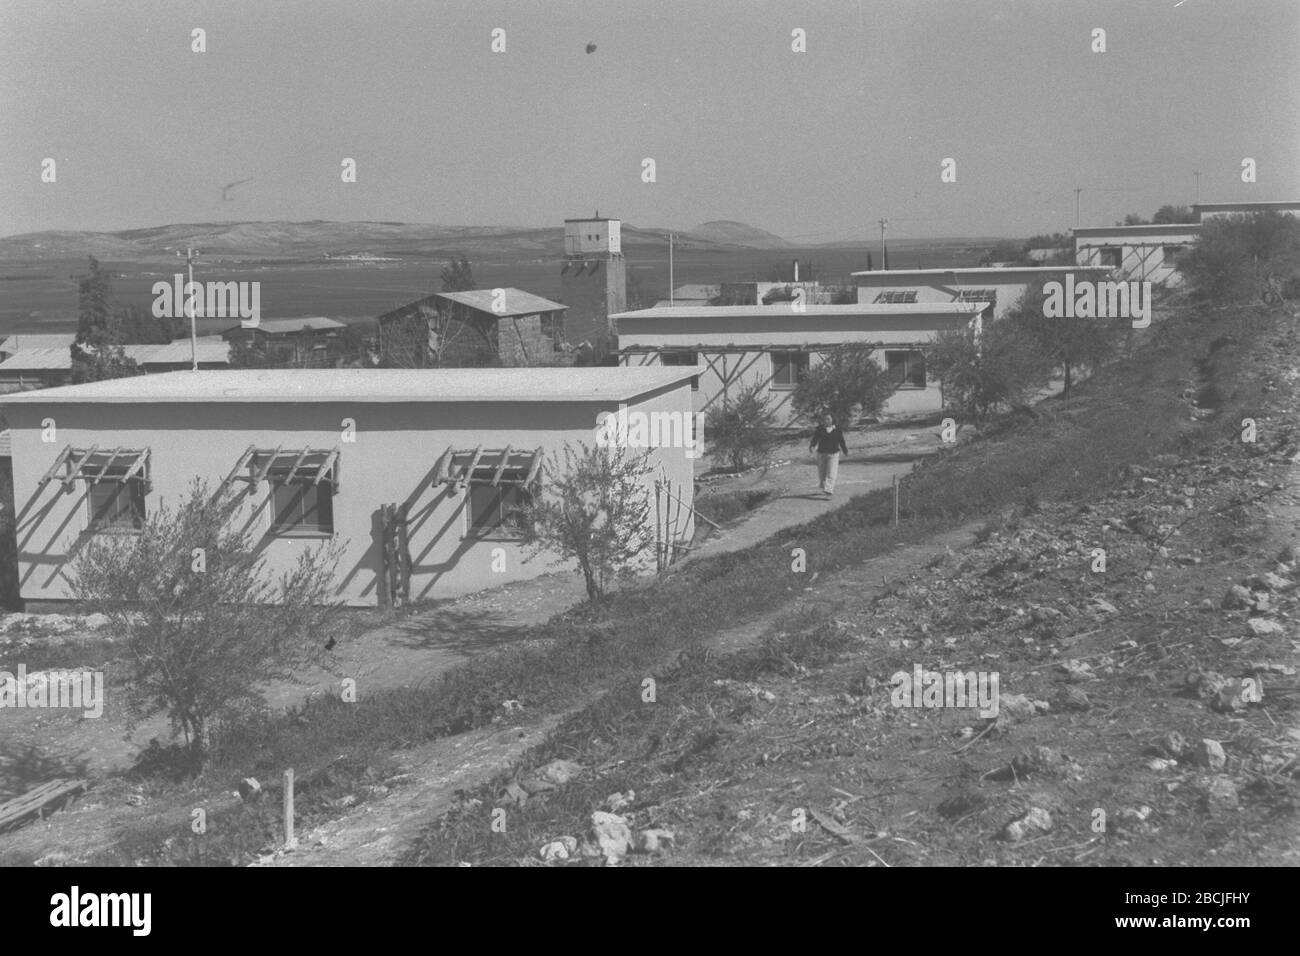 English Kibbutz Member Houses At Kibbutz Hazorea E O U E Ss O E I I N I E U Ss O N E U February 1946 This Is Available From National Photo Collection Of Israel Photography Dept Goverment Press Office